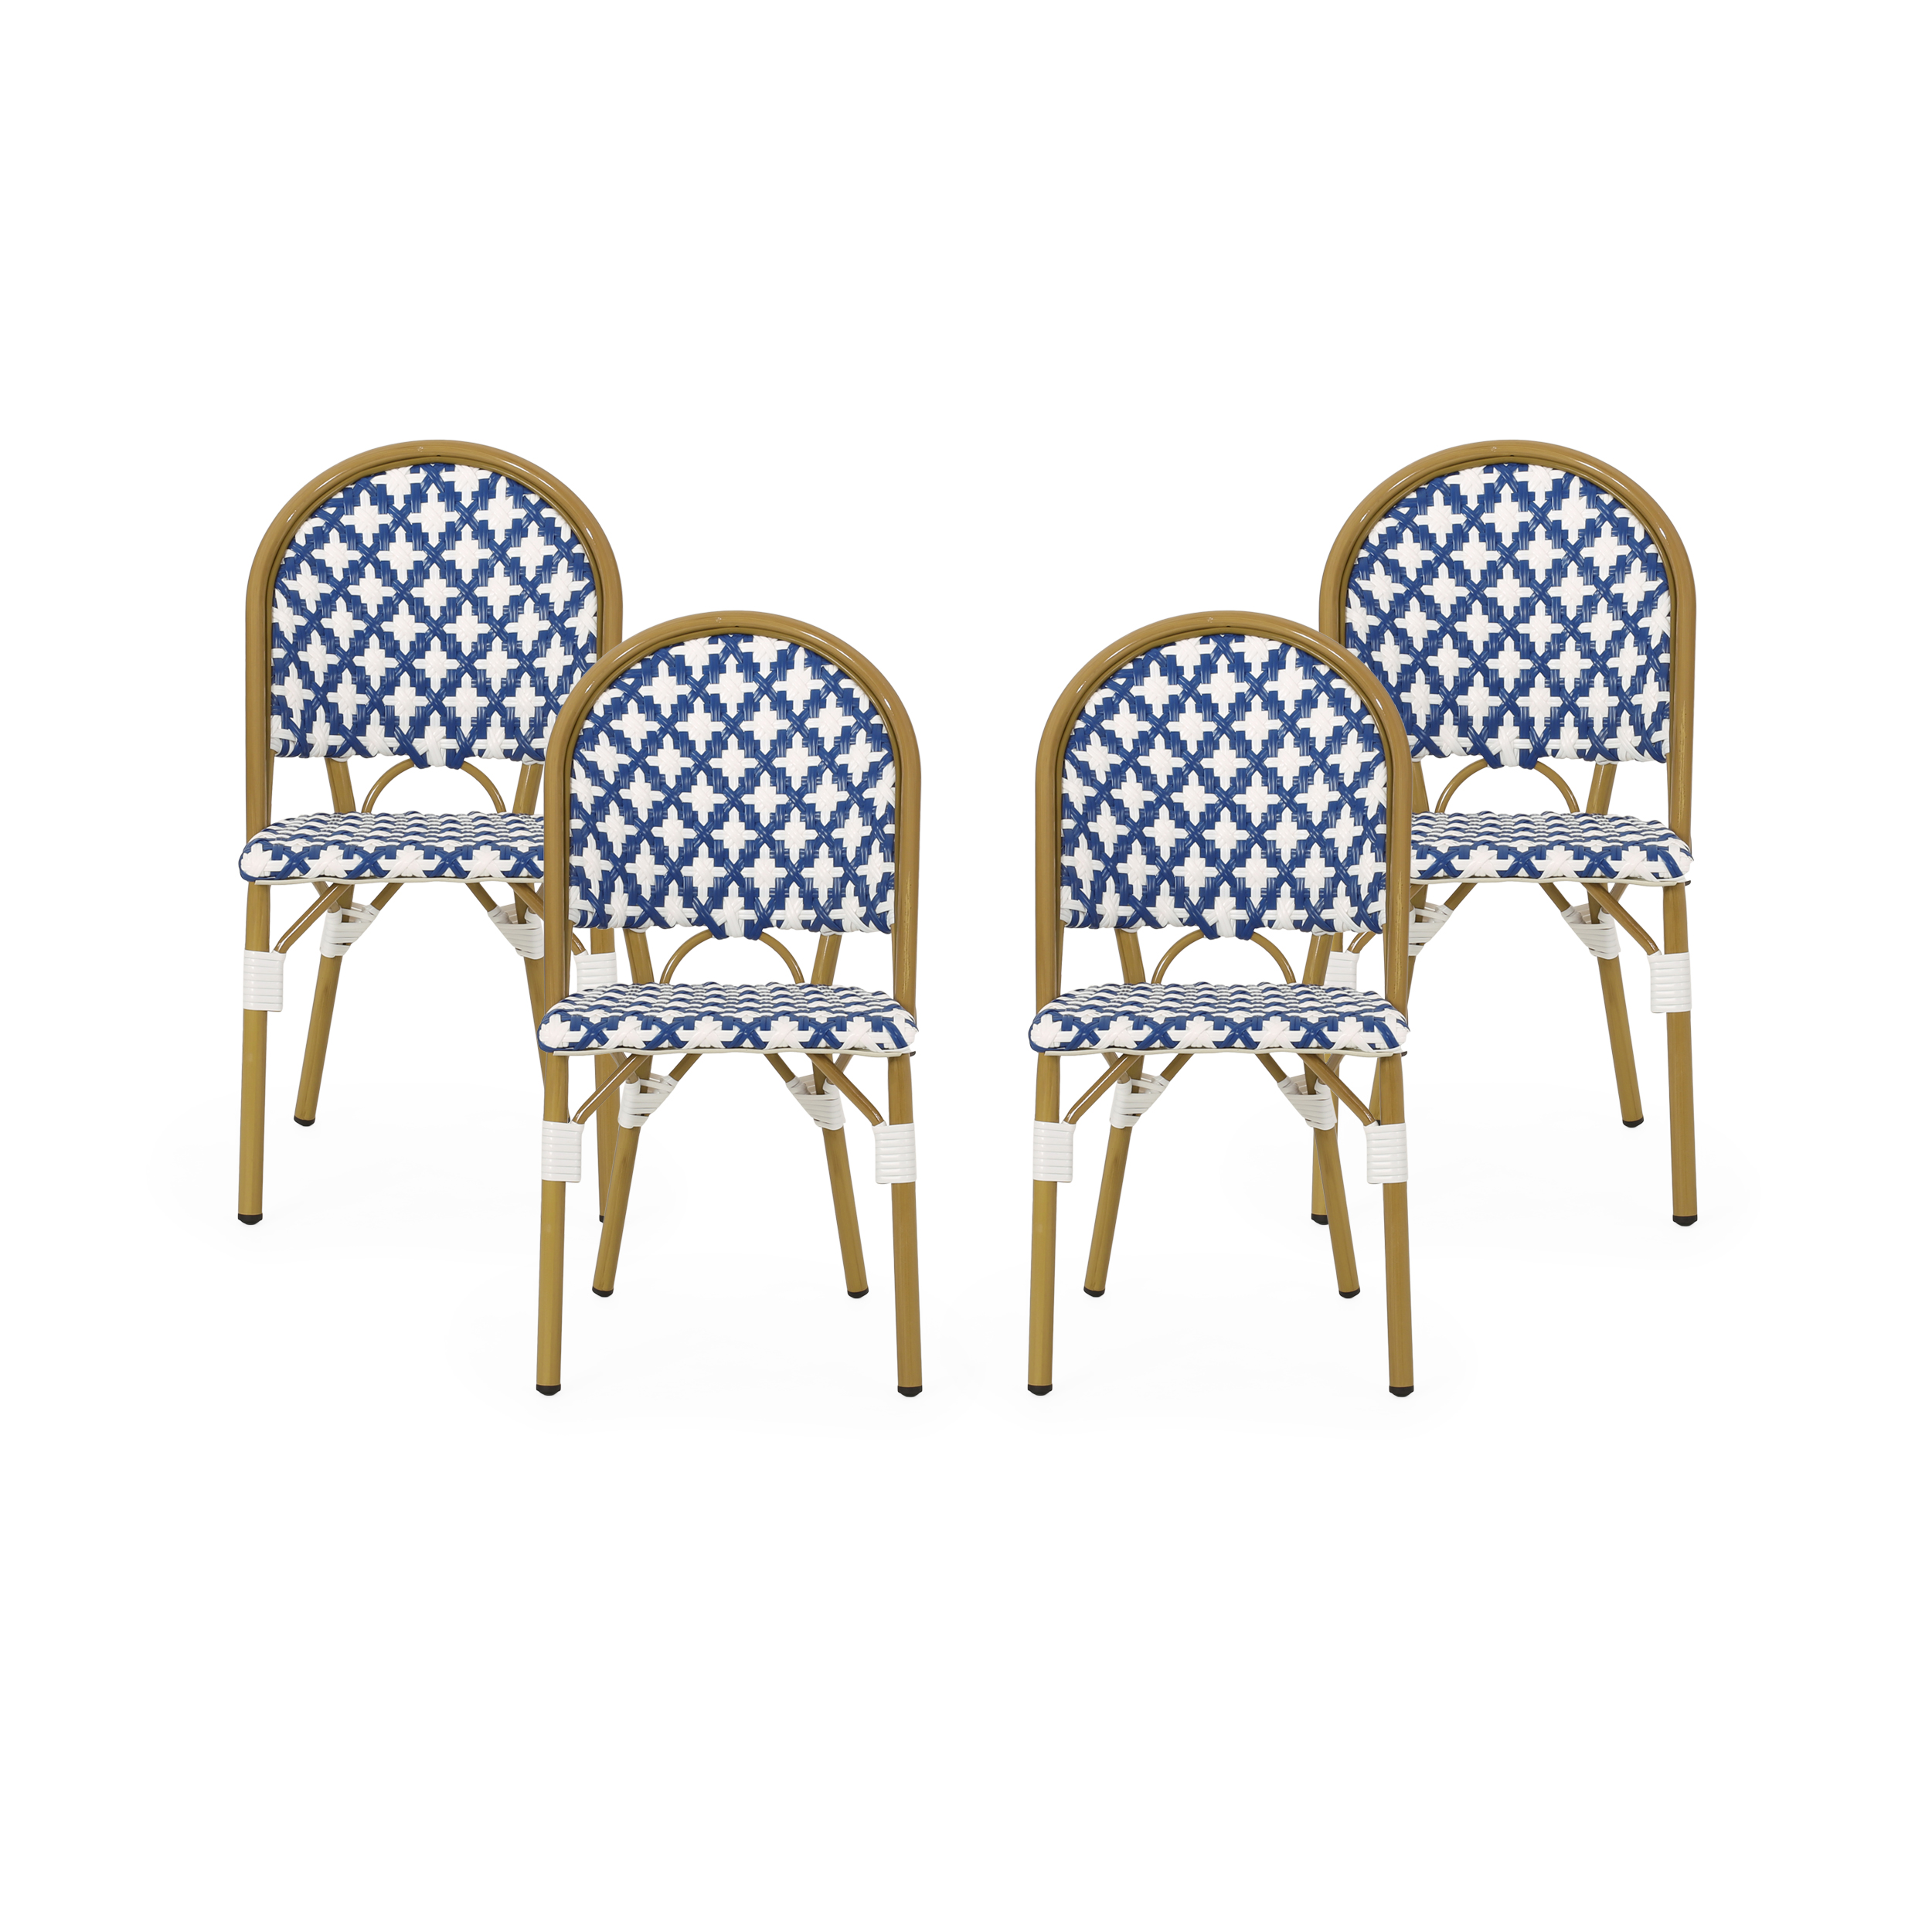 Noble House Louna Aluminum & Faux Rattan Bistro Chairs in Blue/White (Set of 4) - image 1 of 8